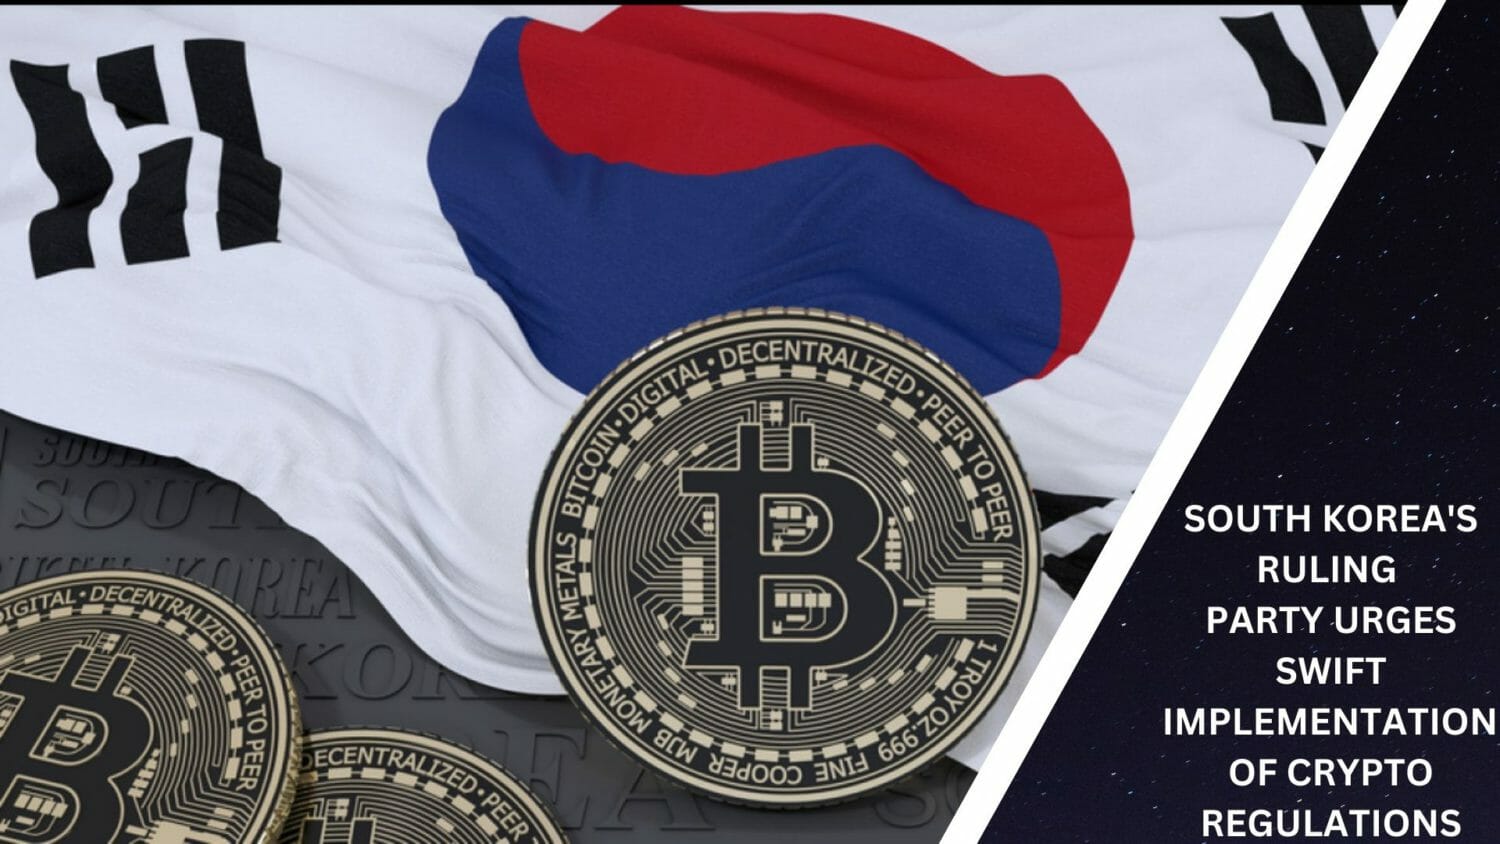 South Korea'S Ruling Party Urges Swift Implementation Of Crypto Regulations